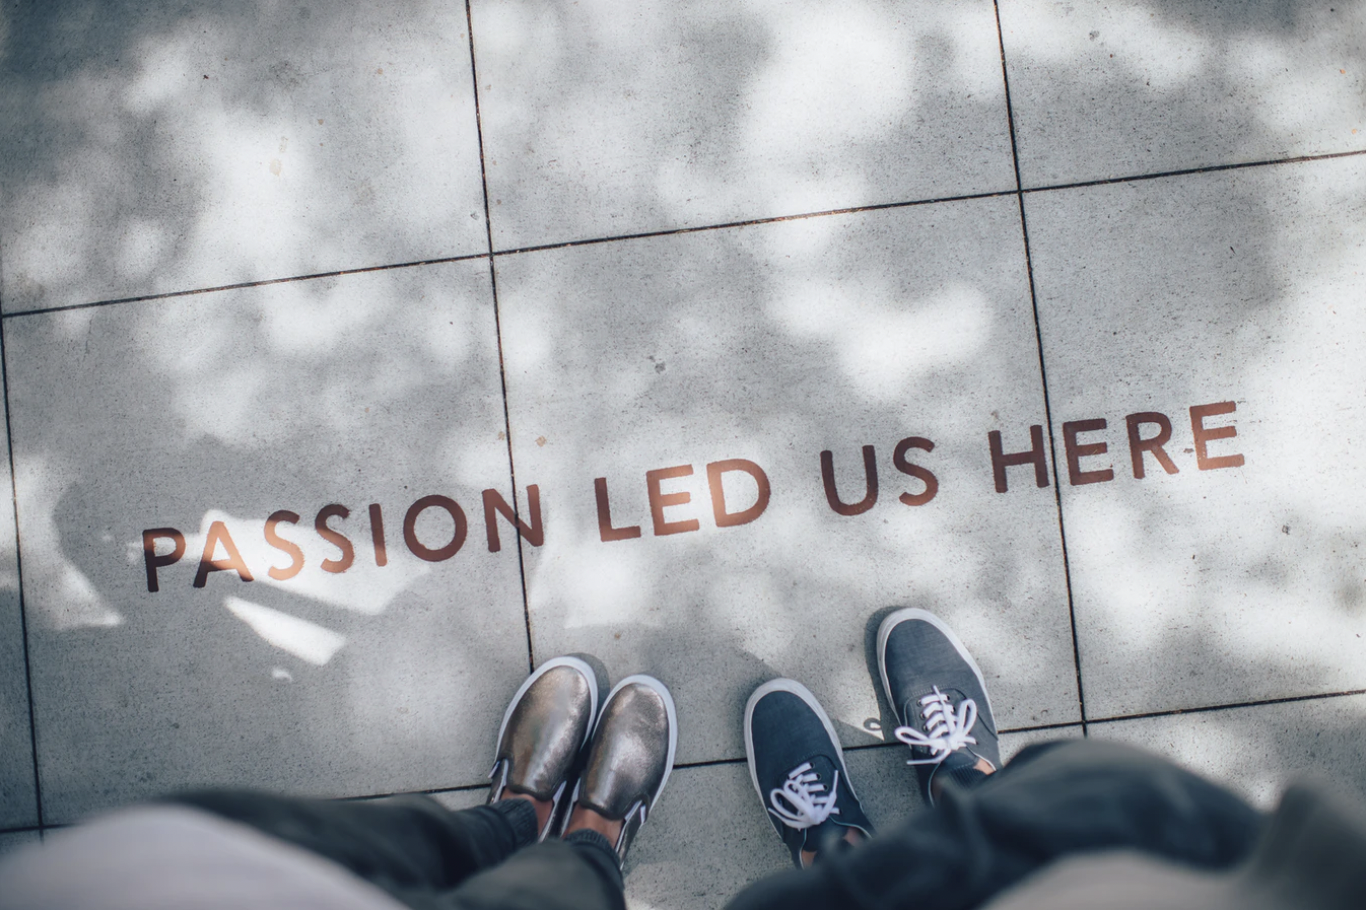 A photo by Ian Schneider, featuring the shoes of two individuals standing next to a sign on the ground that reads “Passion Led Us Here.” 